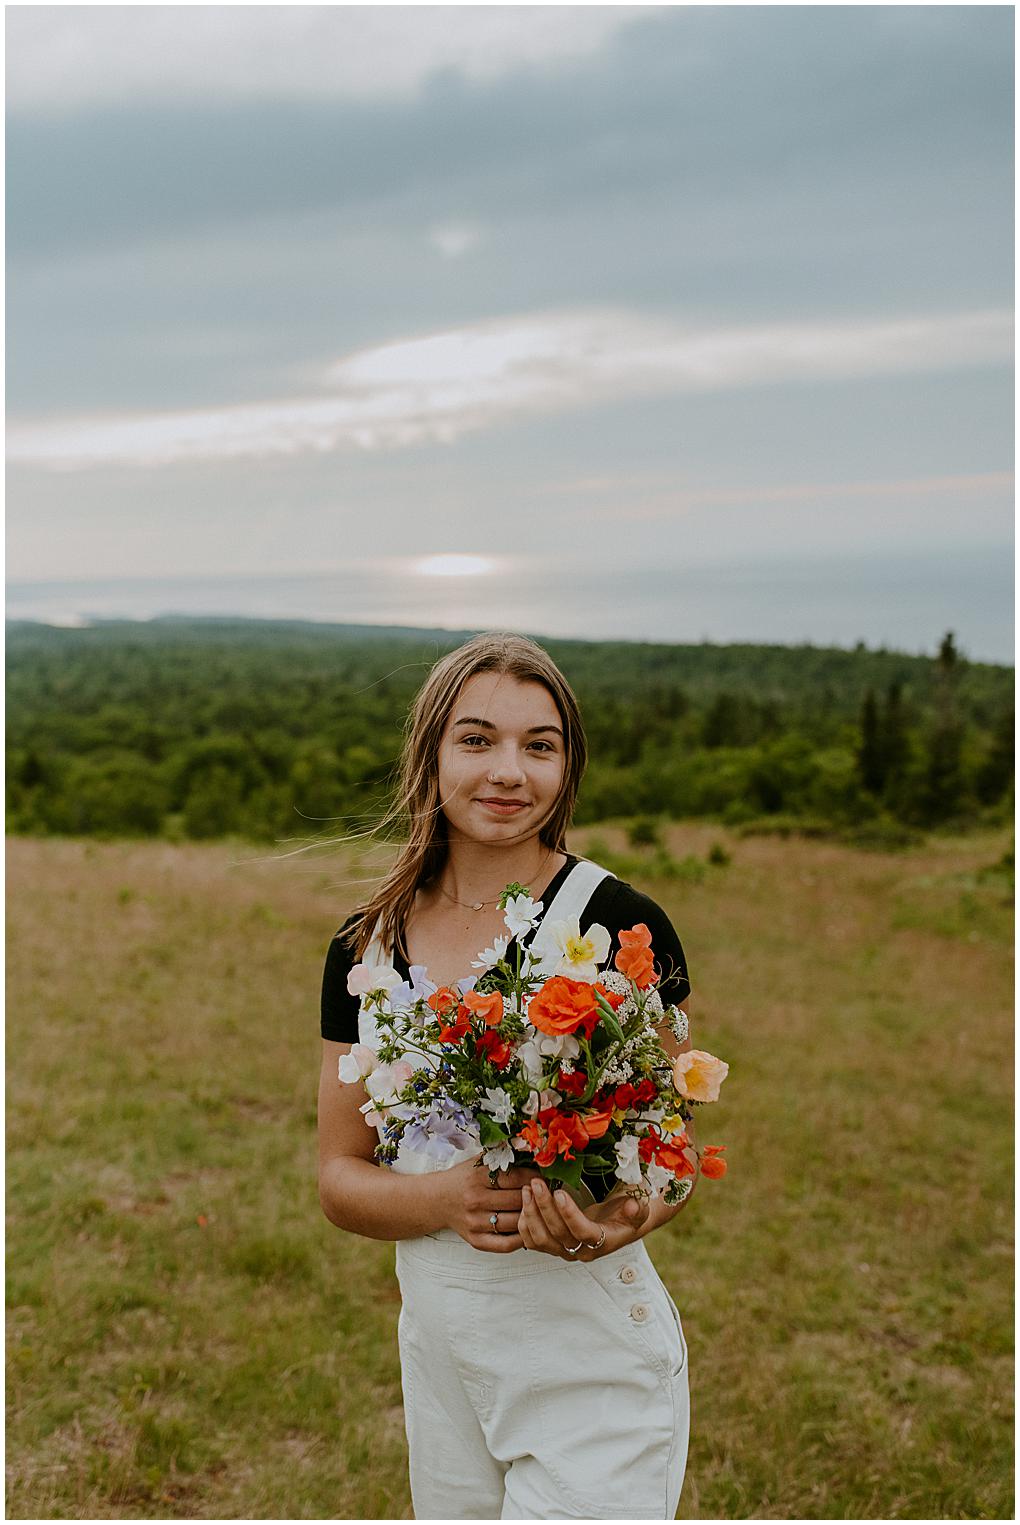 Wisconsin Senior Photographer taking senior pictures in Copper Harbor, Michigan. Flower bouquet by Wander Wild Farm in Eagle River, Wisconsin